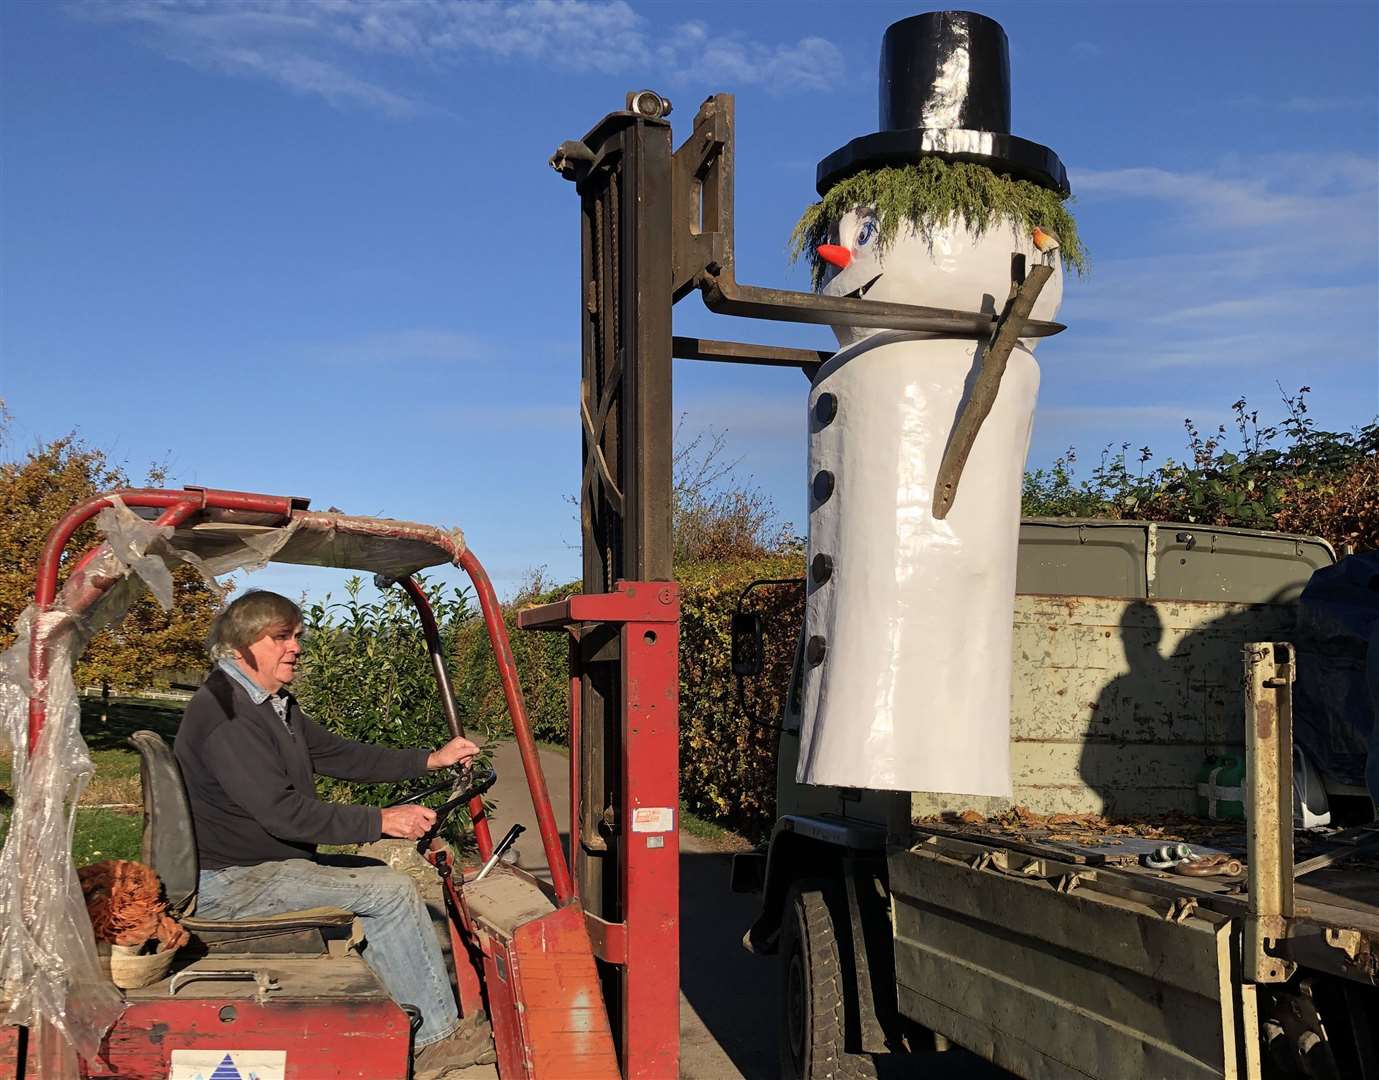 Boris the snowman being moved into place on a forklift